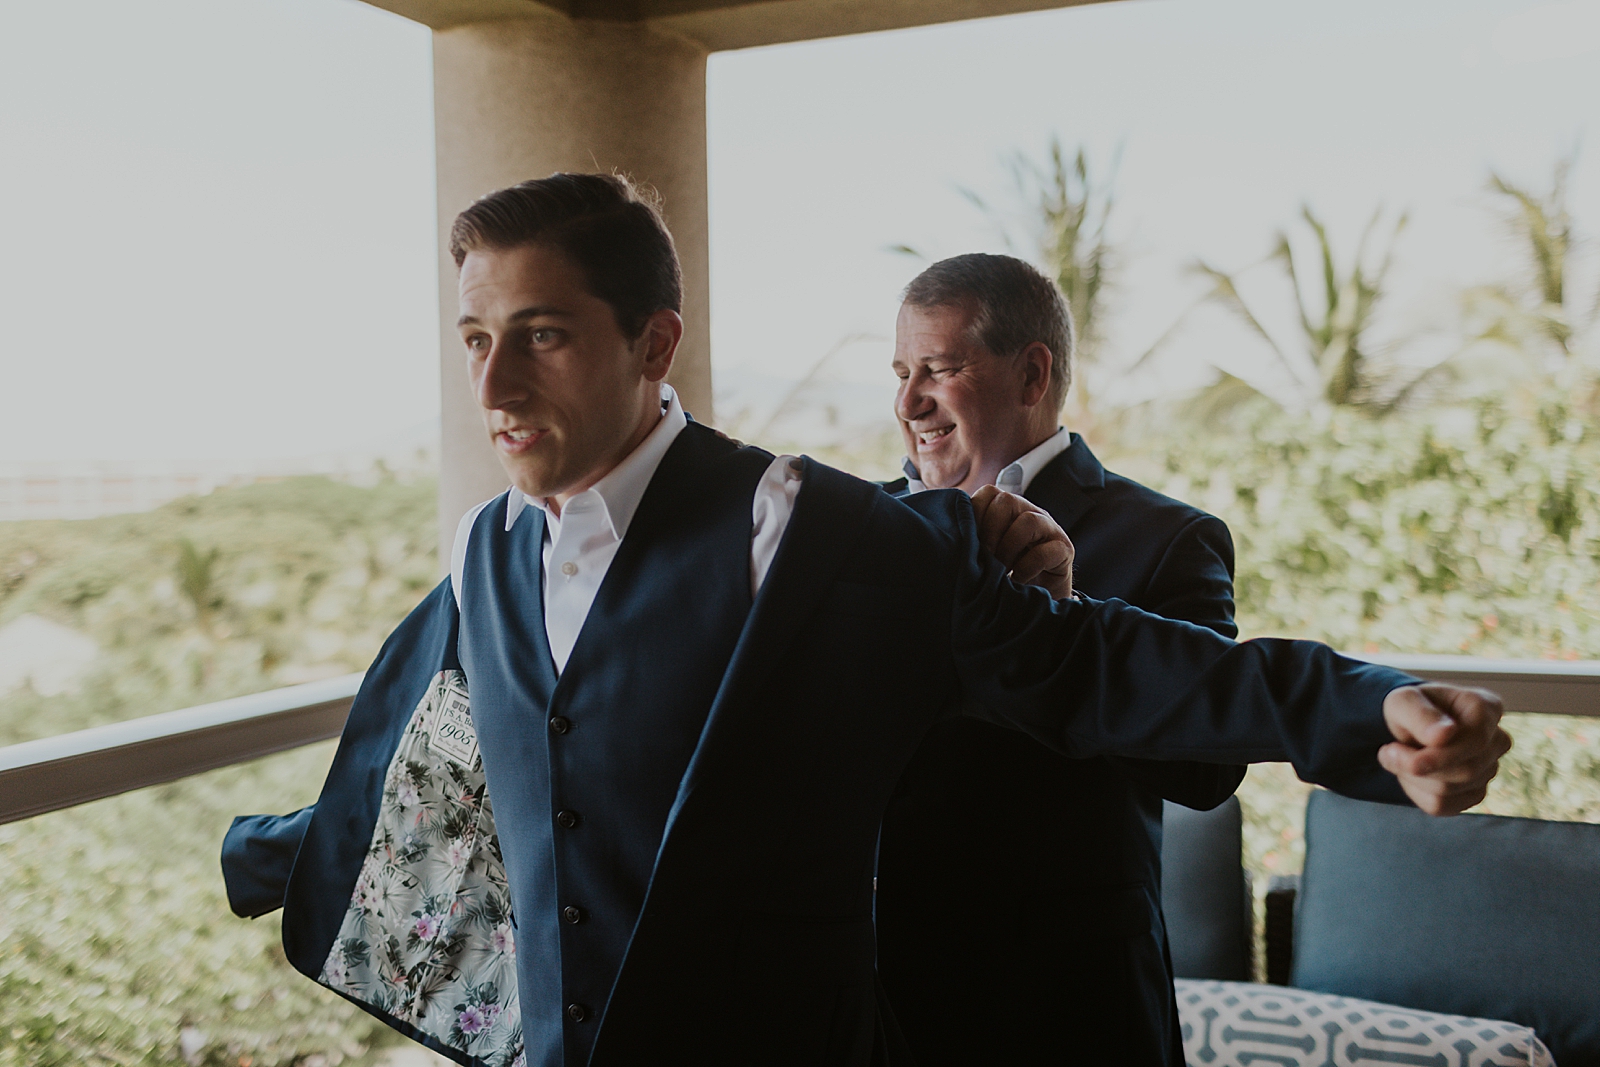 Groom getting help to put jacket on outside